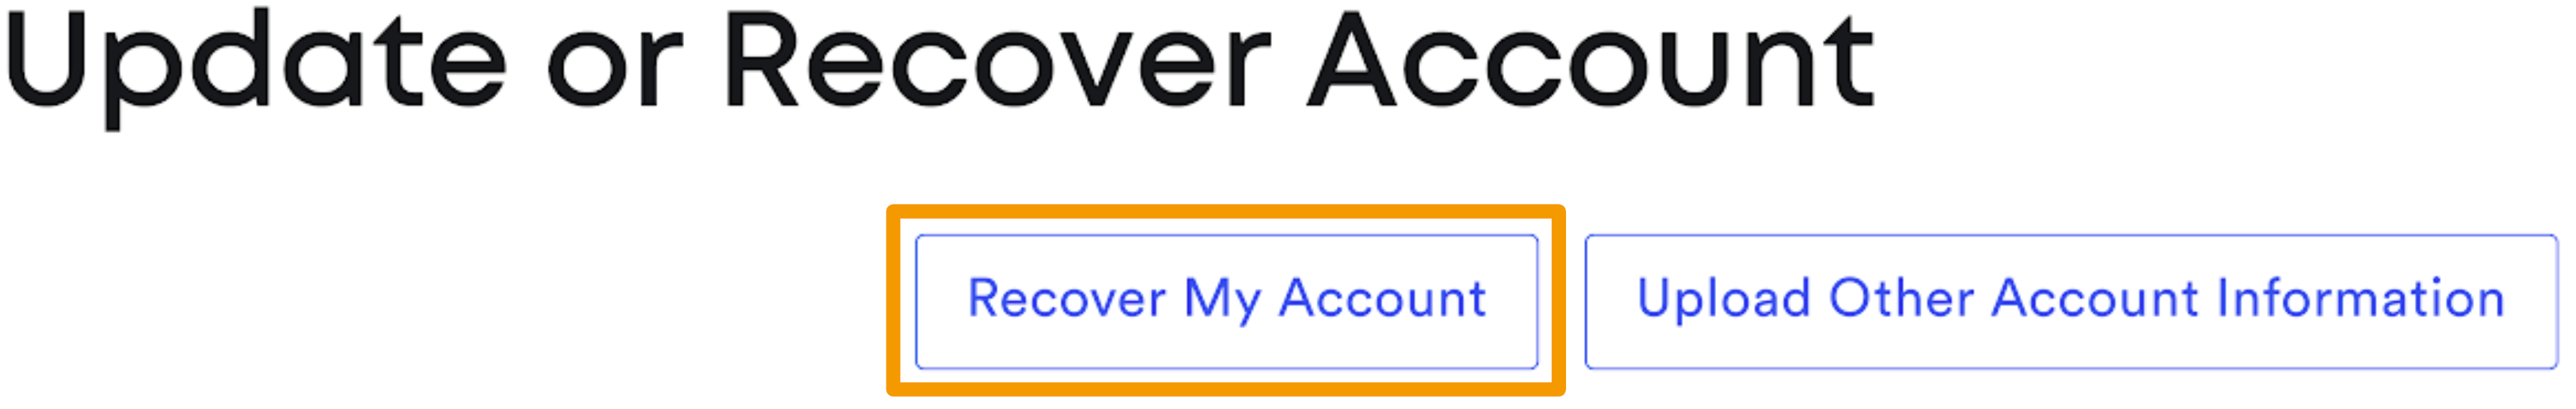 Account_Recovery_-_Recover_my_Account.png